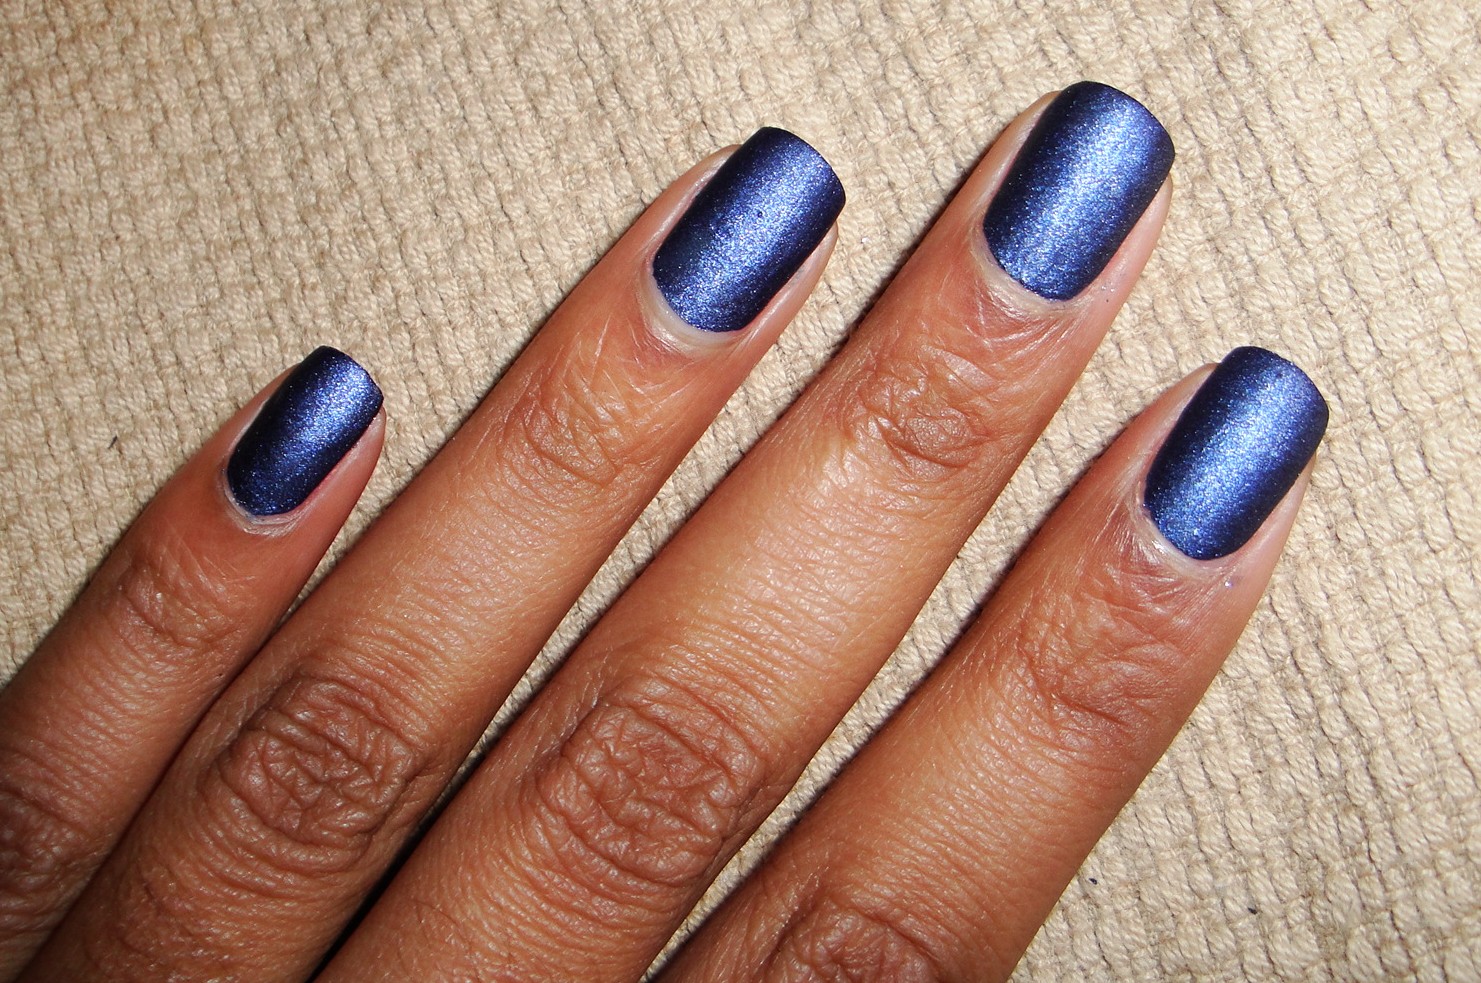 5. OPI "Russian Navy" - wide 8